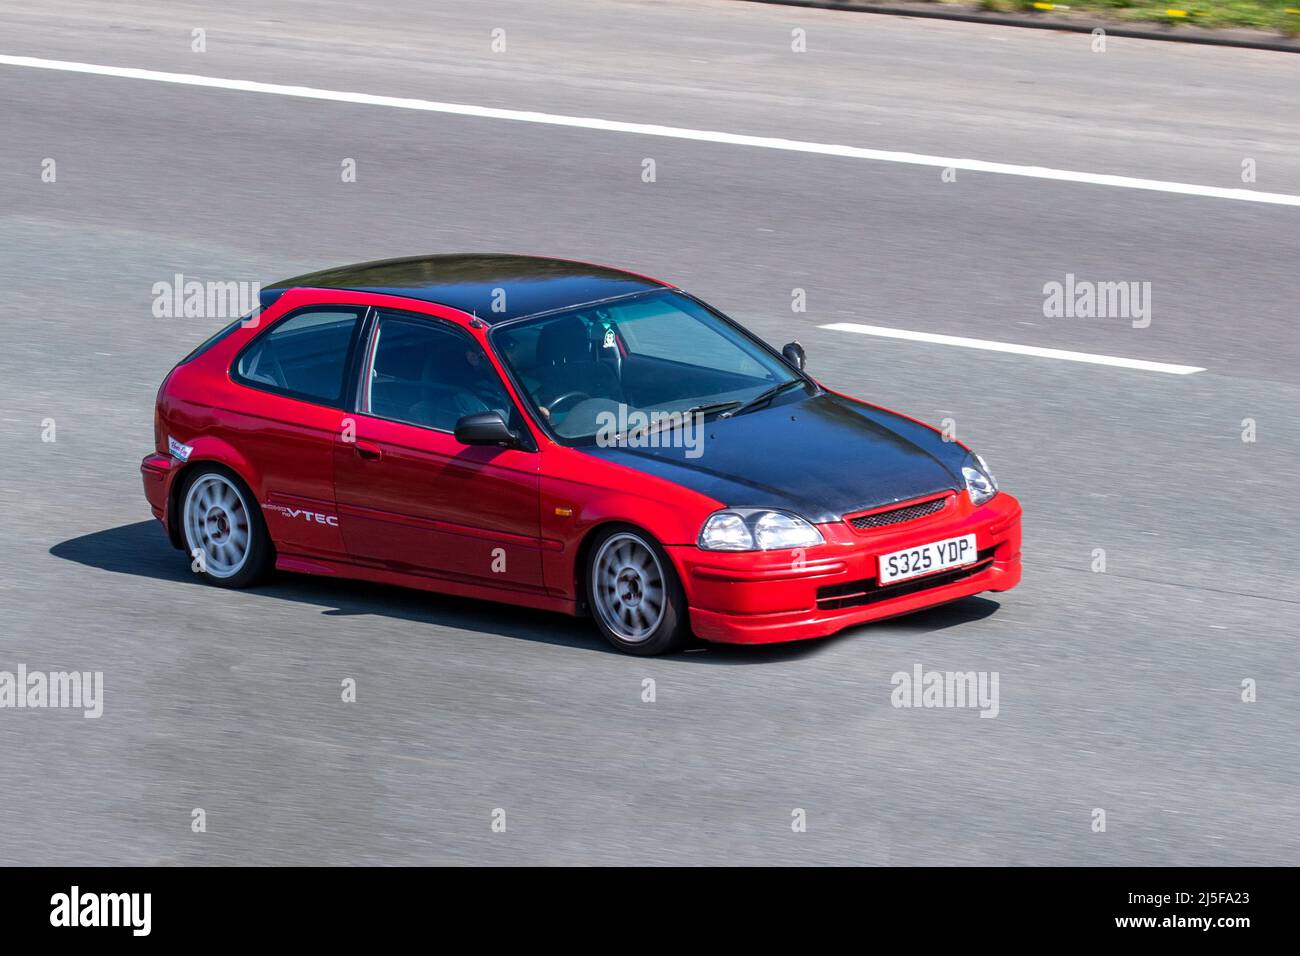 1998 90s nineties red Honda Civic Illusion 1396cc 5 speed manual VTec decals; driving on the M61 motorway, UK Stock Photo